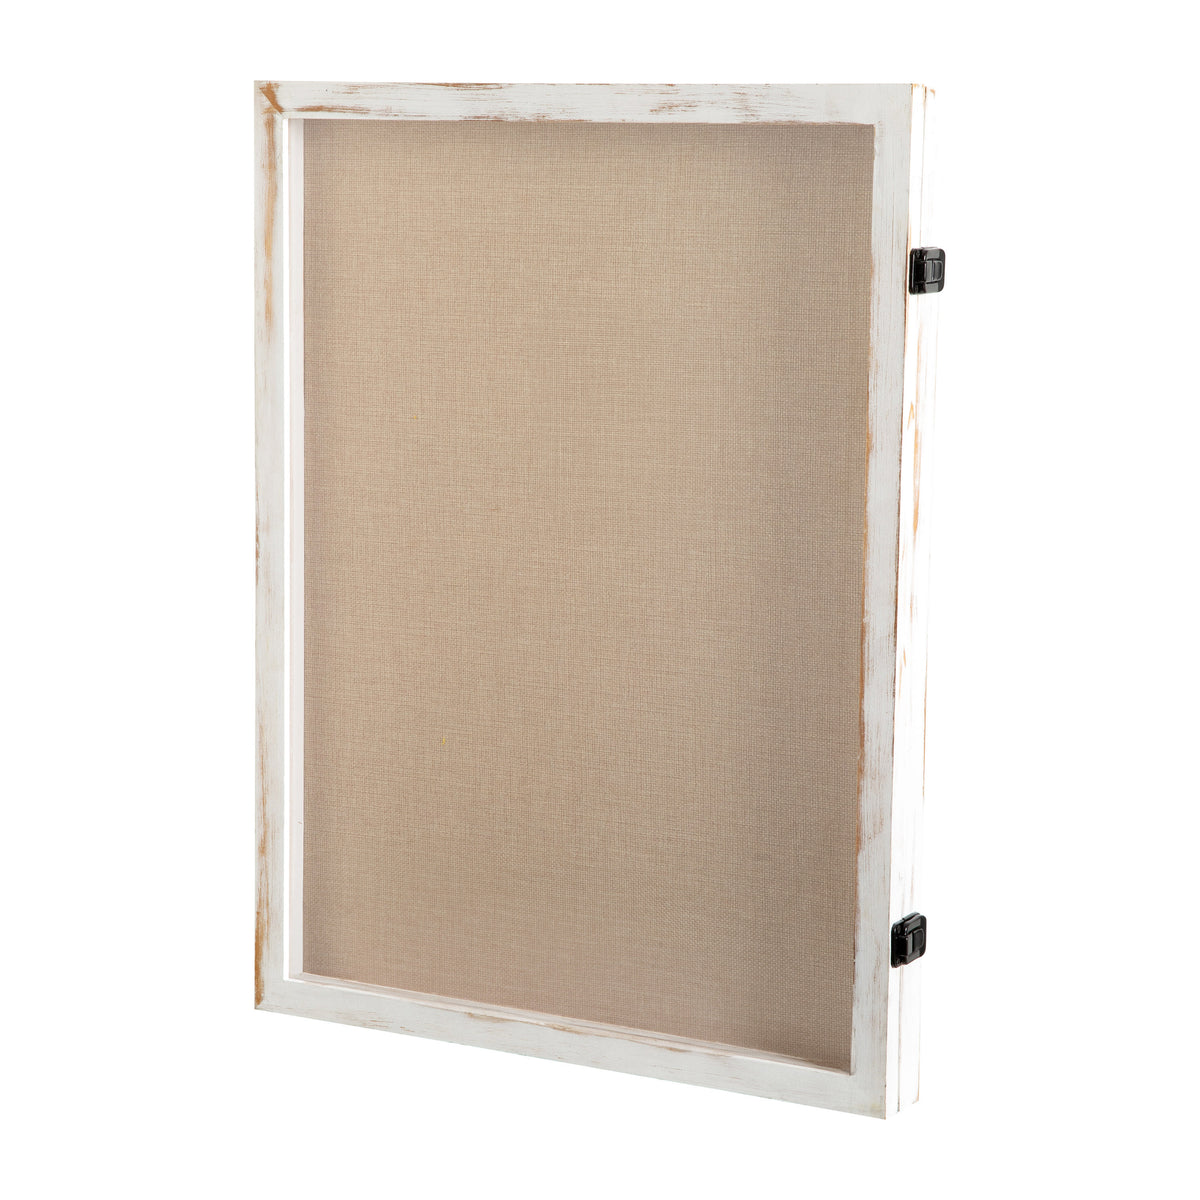 White Wash,18.5"W x 2"D x 23.5"H |#| Solid Pine Whitewash Shadow Display Case with Linen Liner - 18 x 24